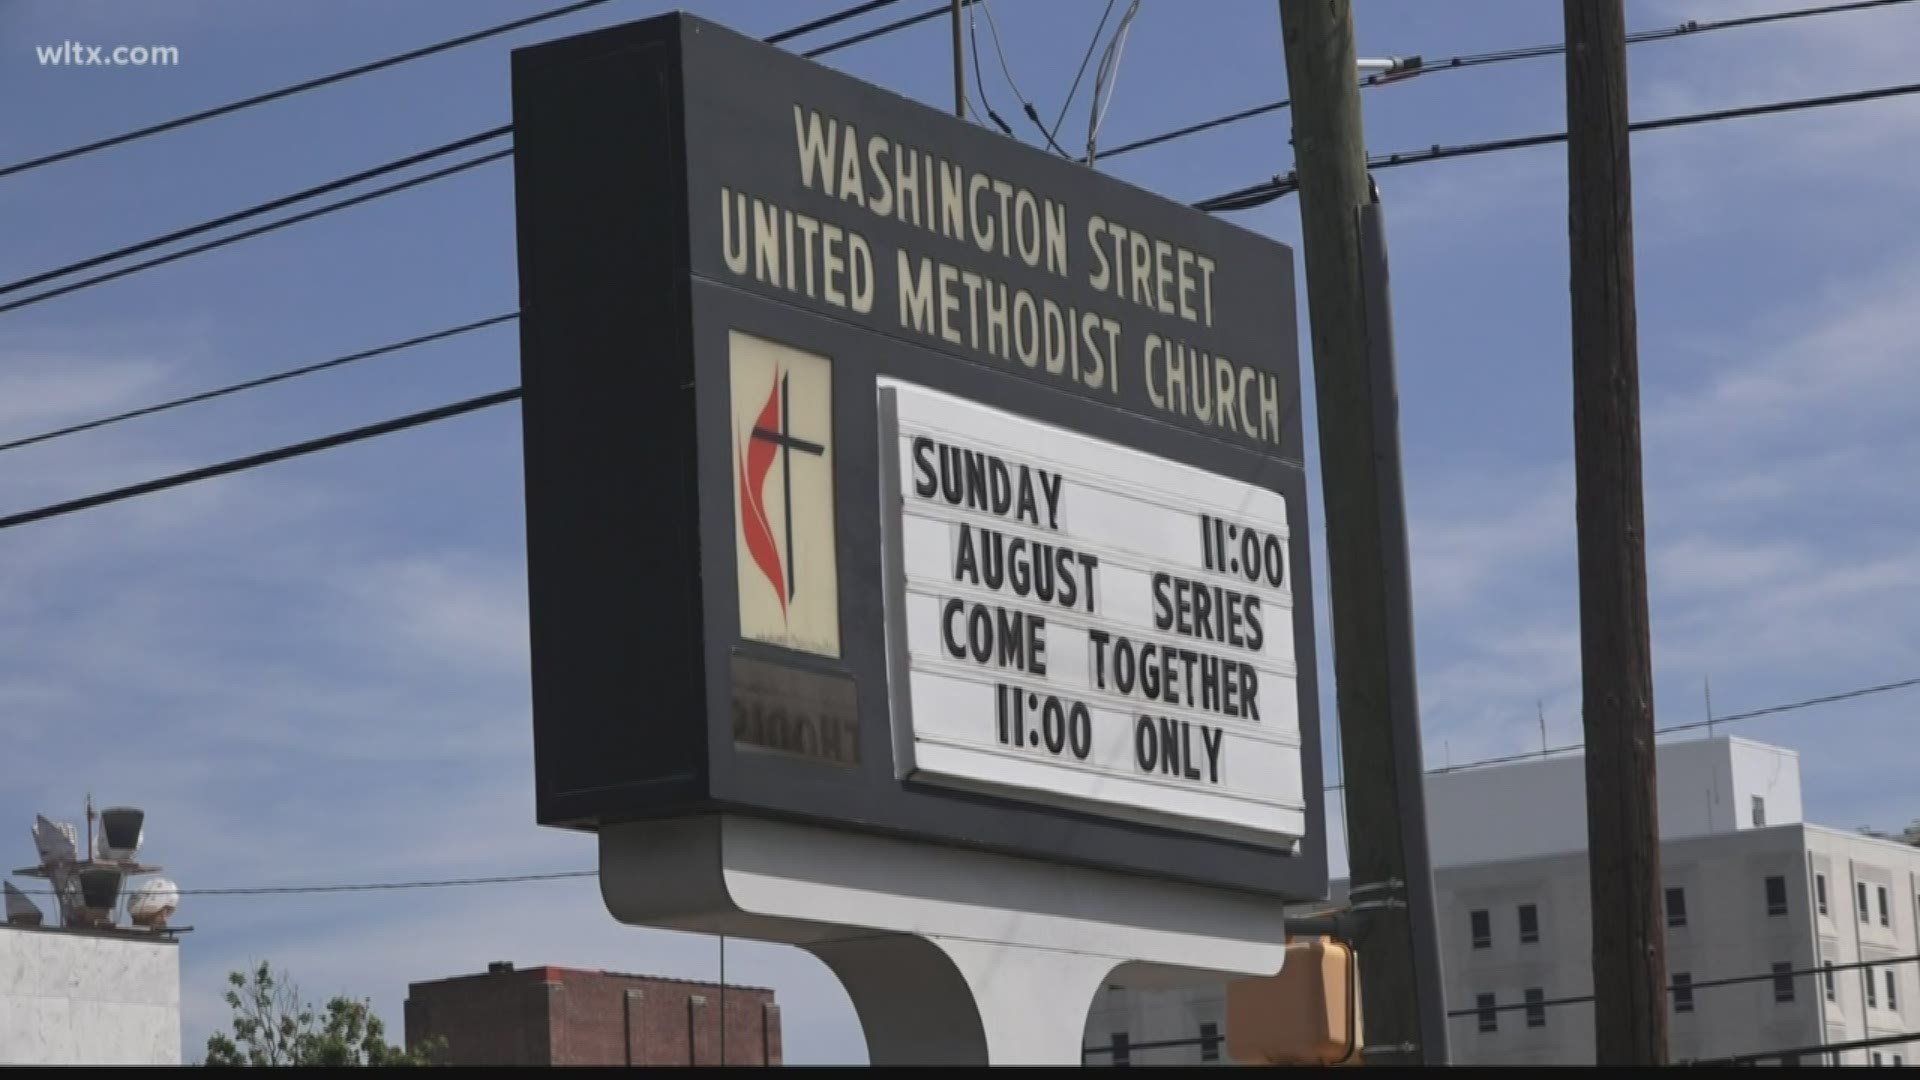 The Columbia church, founded in 1803, said they're pushing for a more inclusive faith